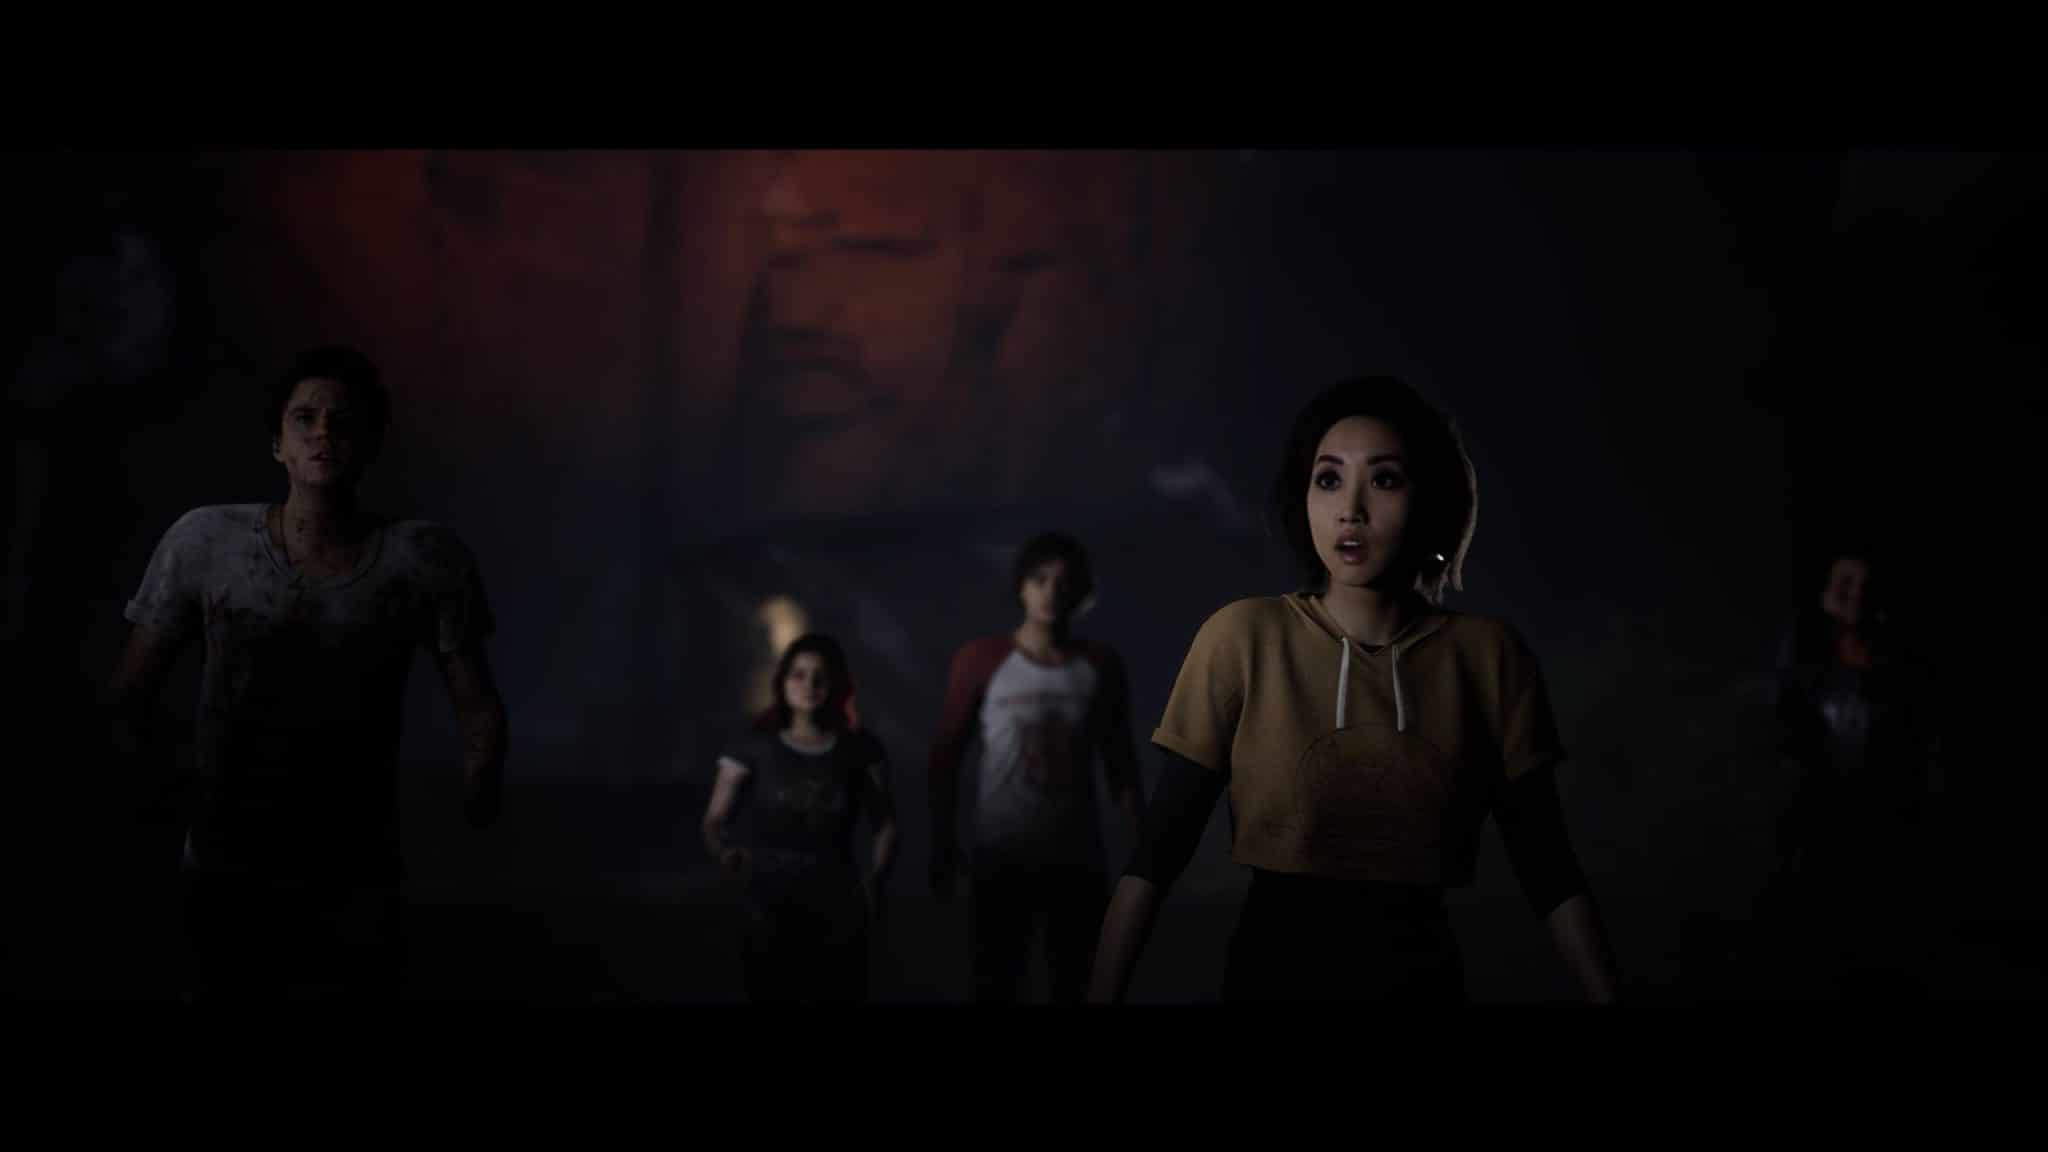 Copy-of-The-Quarry-Screenshot-Scared-Camp-Counselors